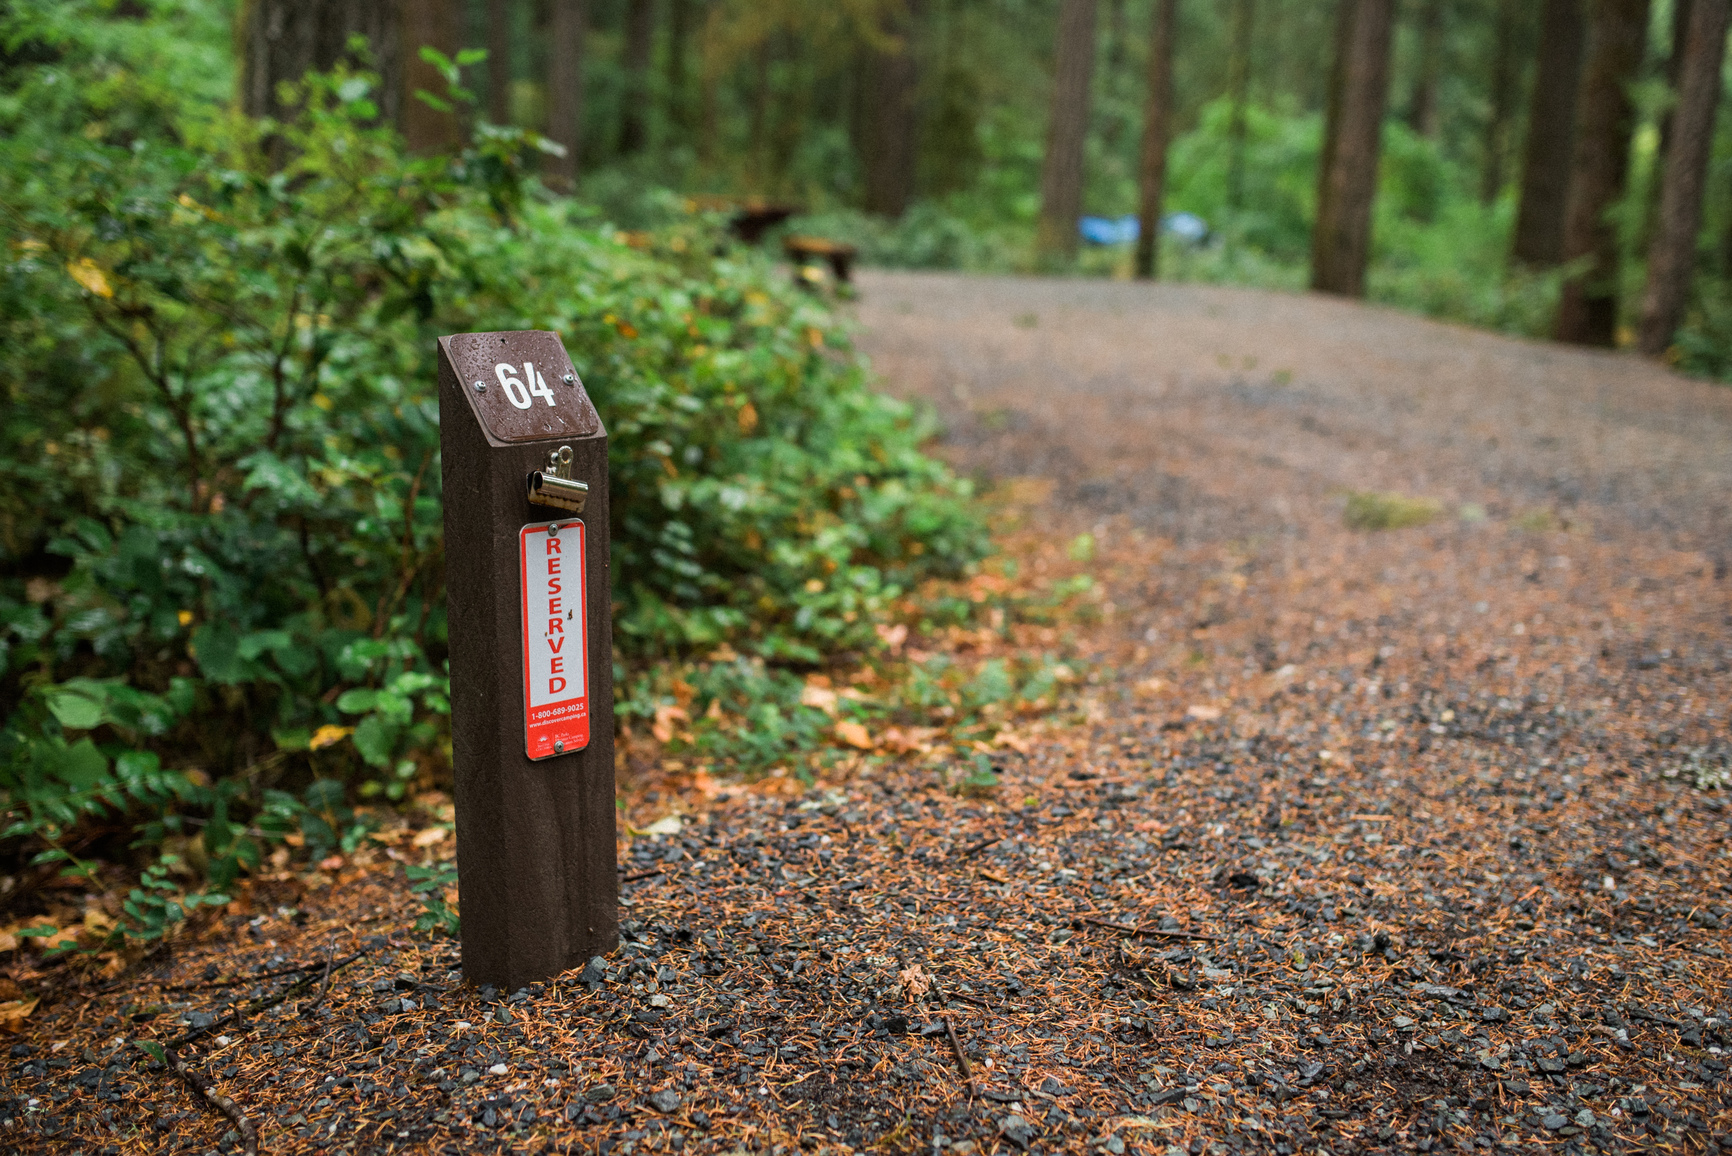 The signpost of campsite 64 with a reserved sticker